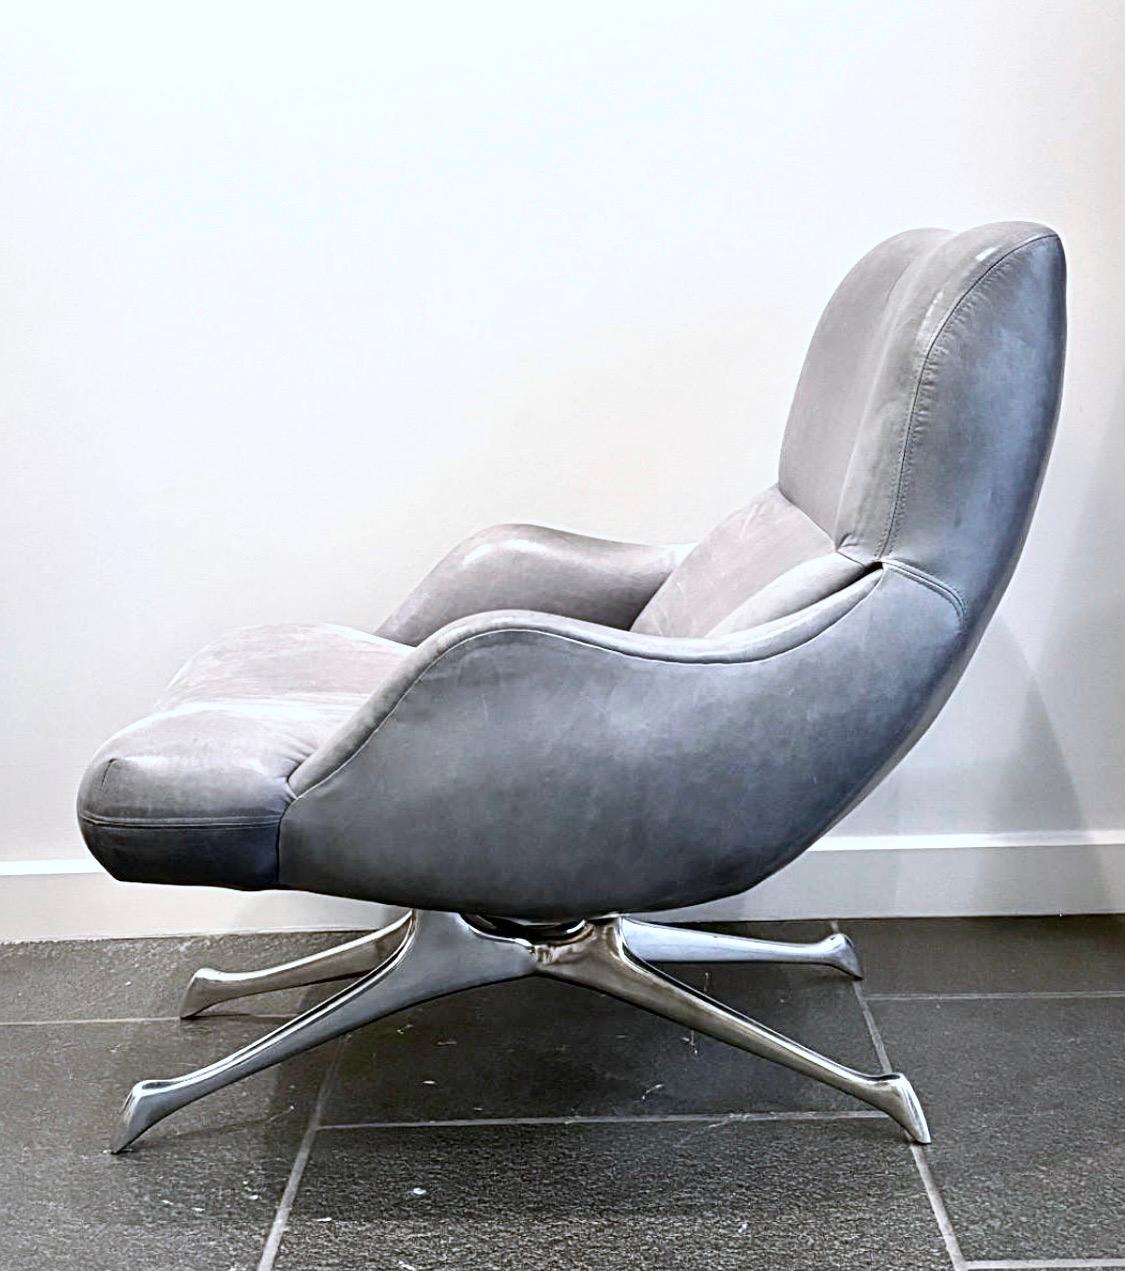 Vladimir Kagan VK Armchair, Made in Italy. Gray Blue leather. Polished aluminum base. Originally designed as the Contour Collection (Trisymmetric Chaise Longue and Armchair Lounge) in the late 1950’s as a metal version of his tri-symmetric wood